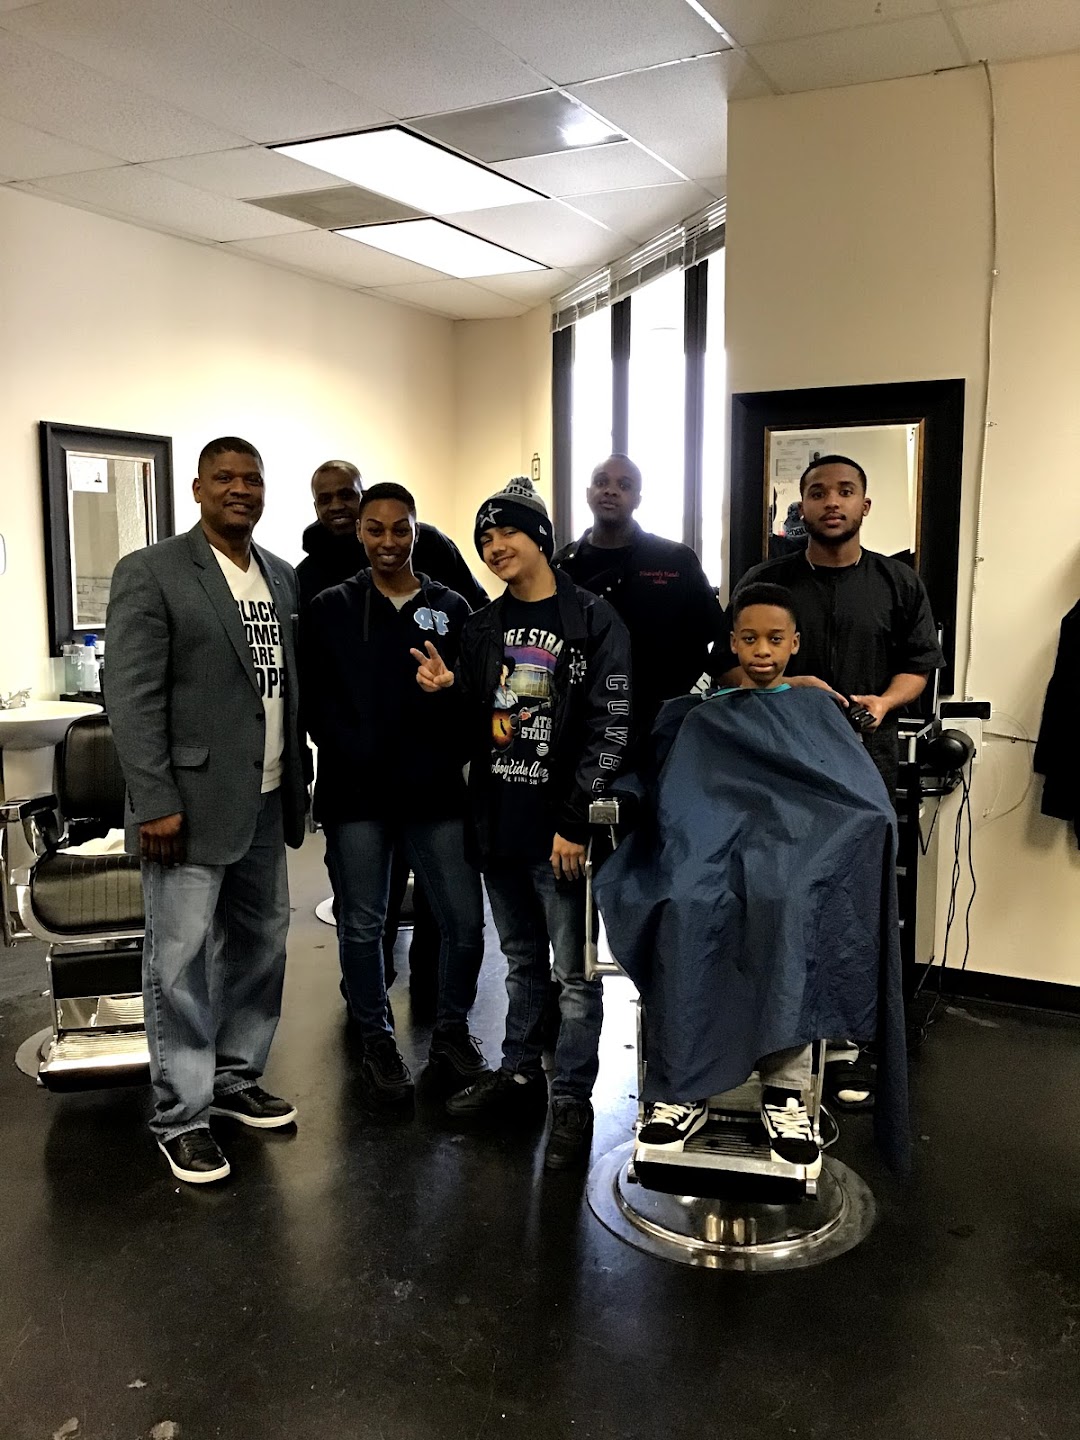 The Academy of Barbering